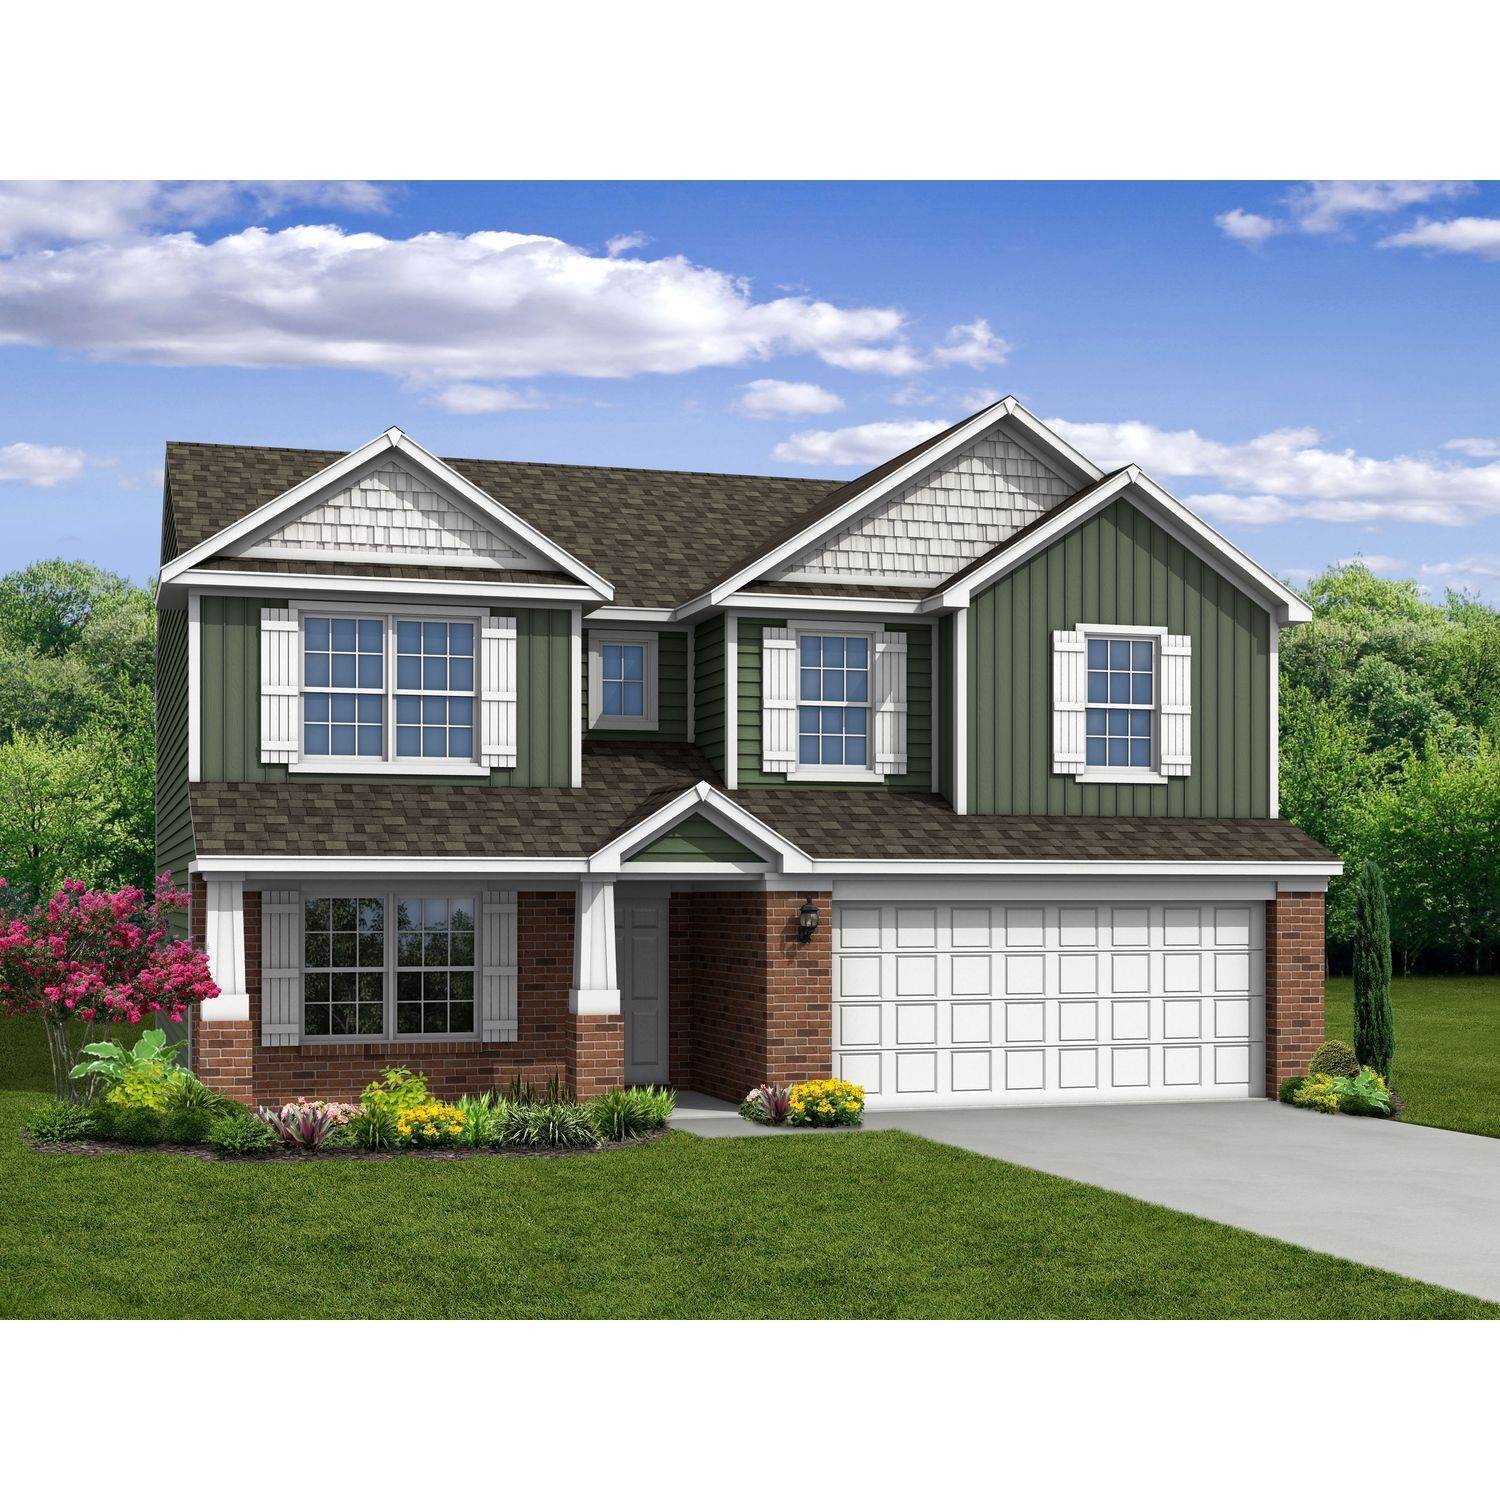 Single Family for Sale at Indianapolis, IN 46235